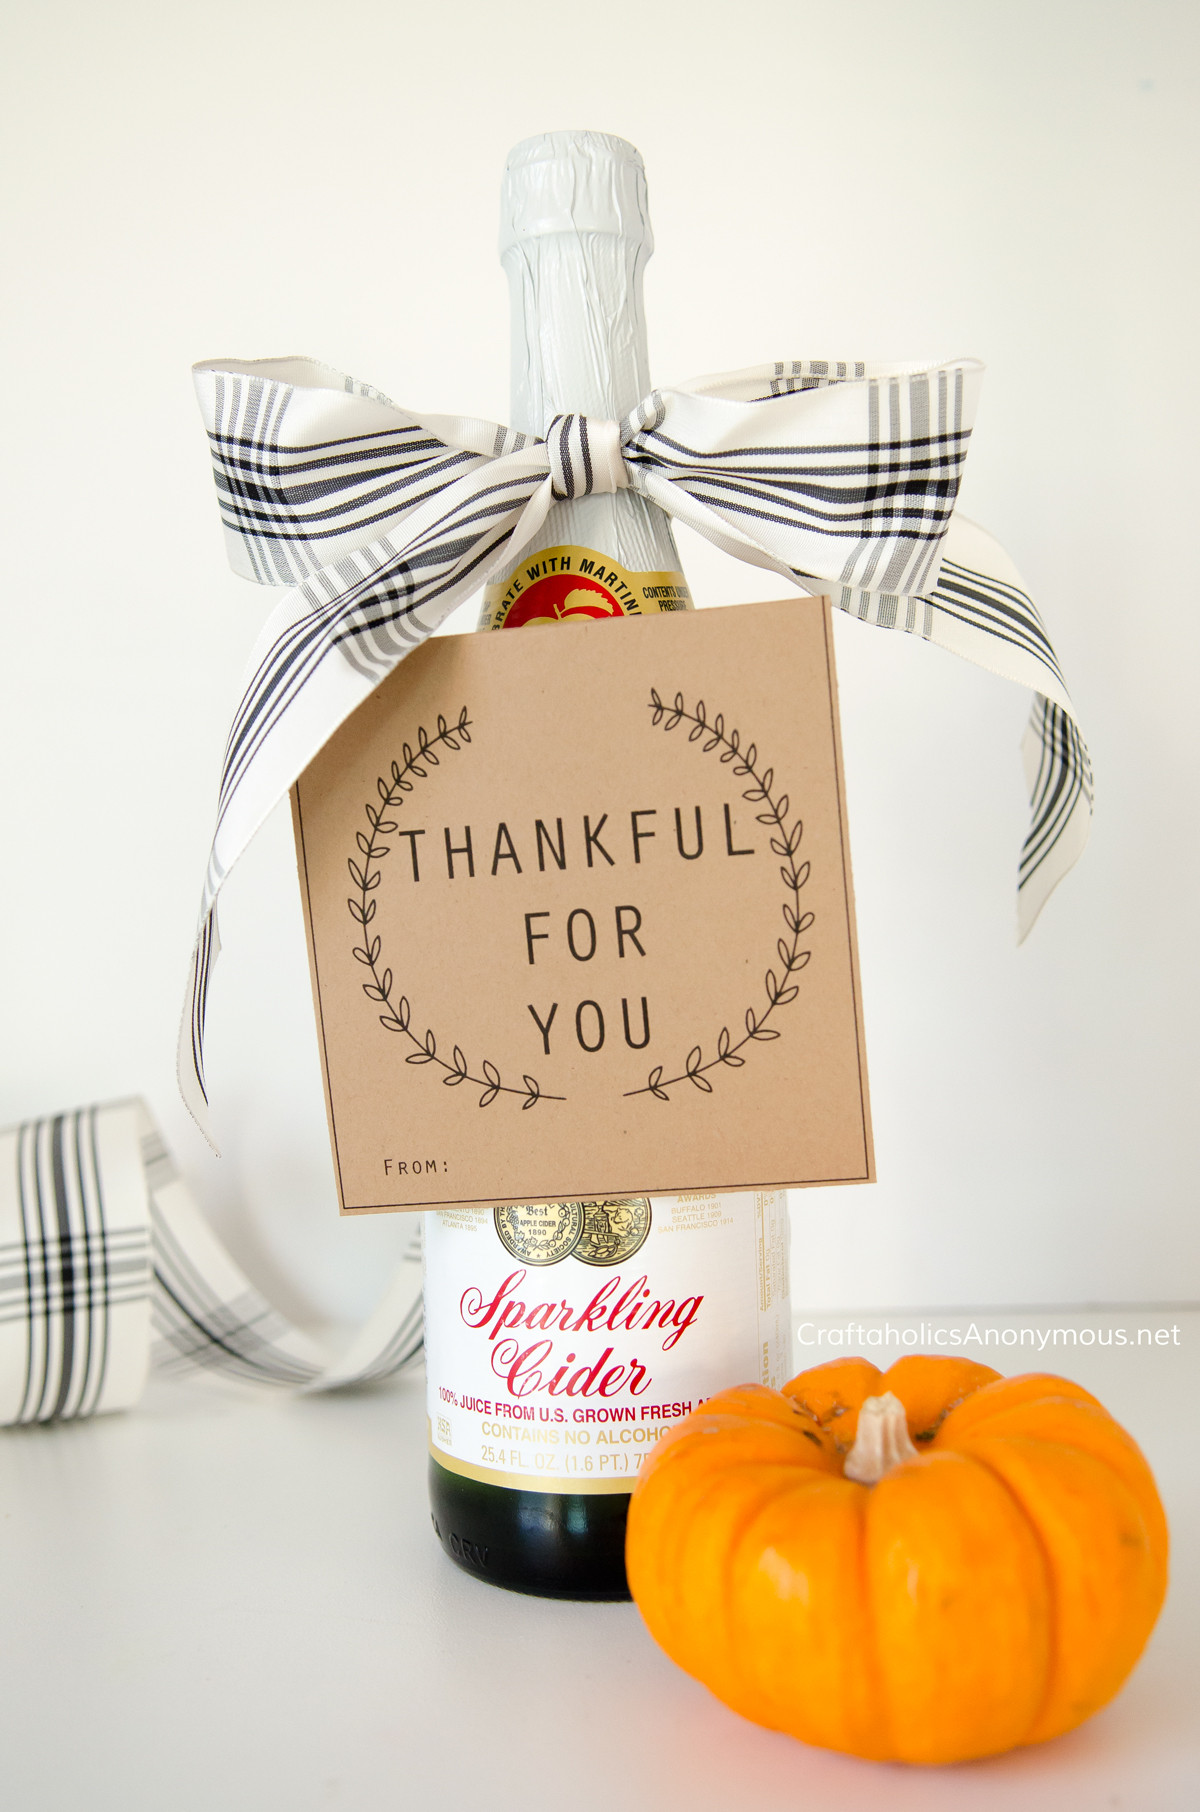 Gift Ideas For Thanksgiving Hostess
 Craftaholics Anonymous